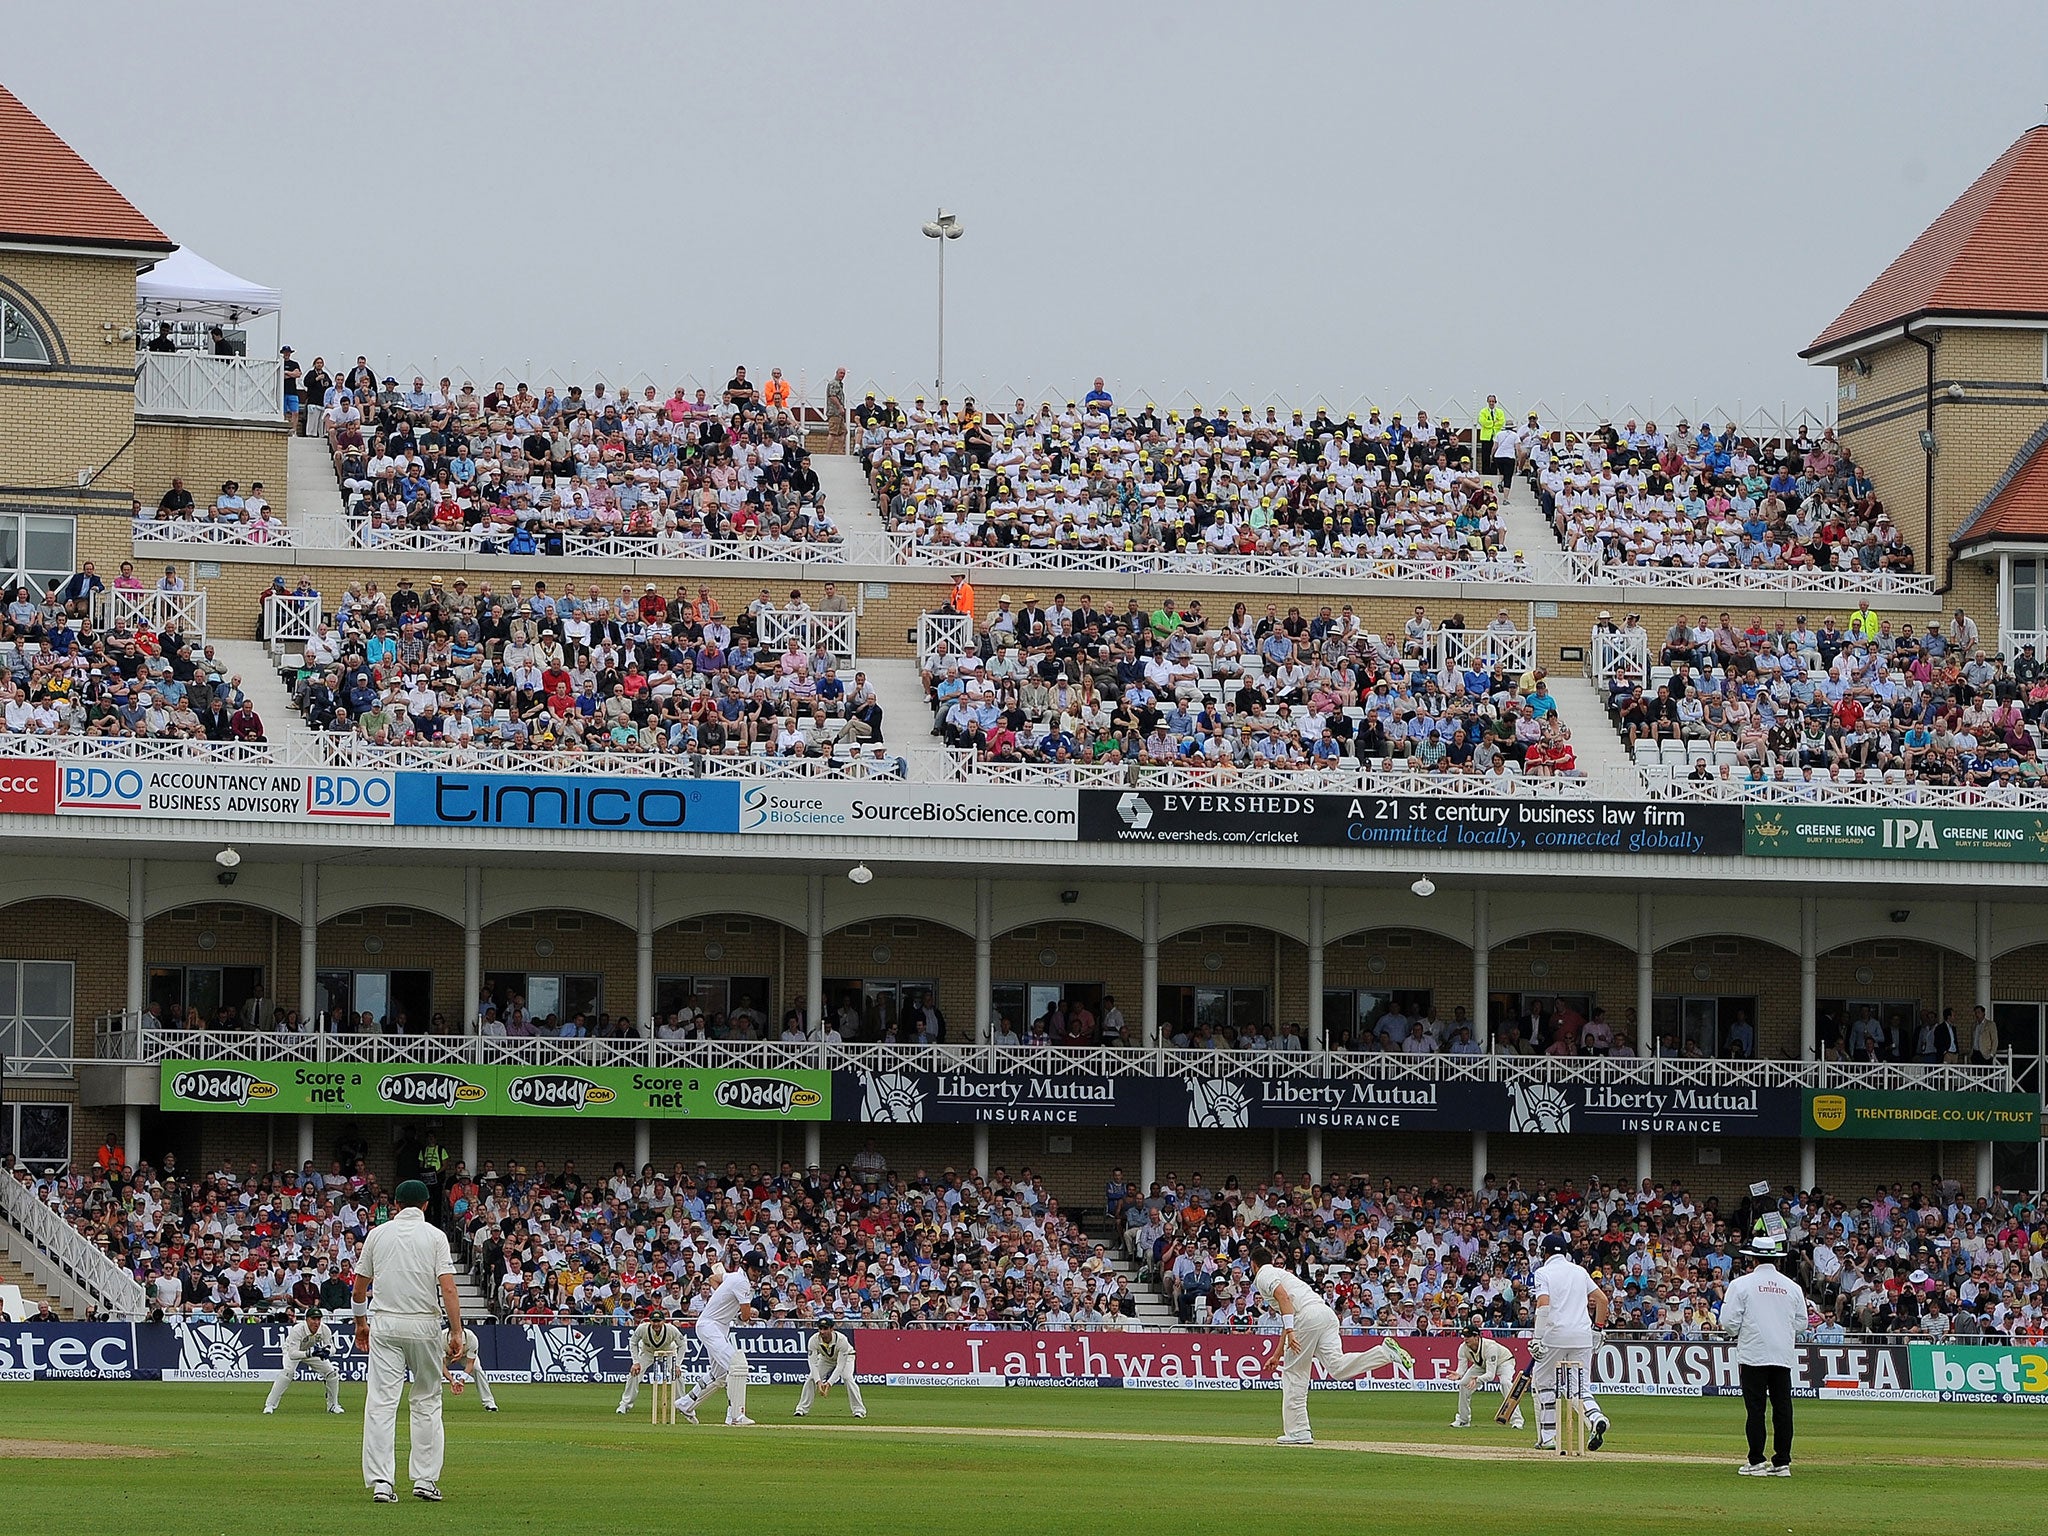 An overcast day at Trent Bridge during the 2013 Ashes